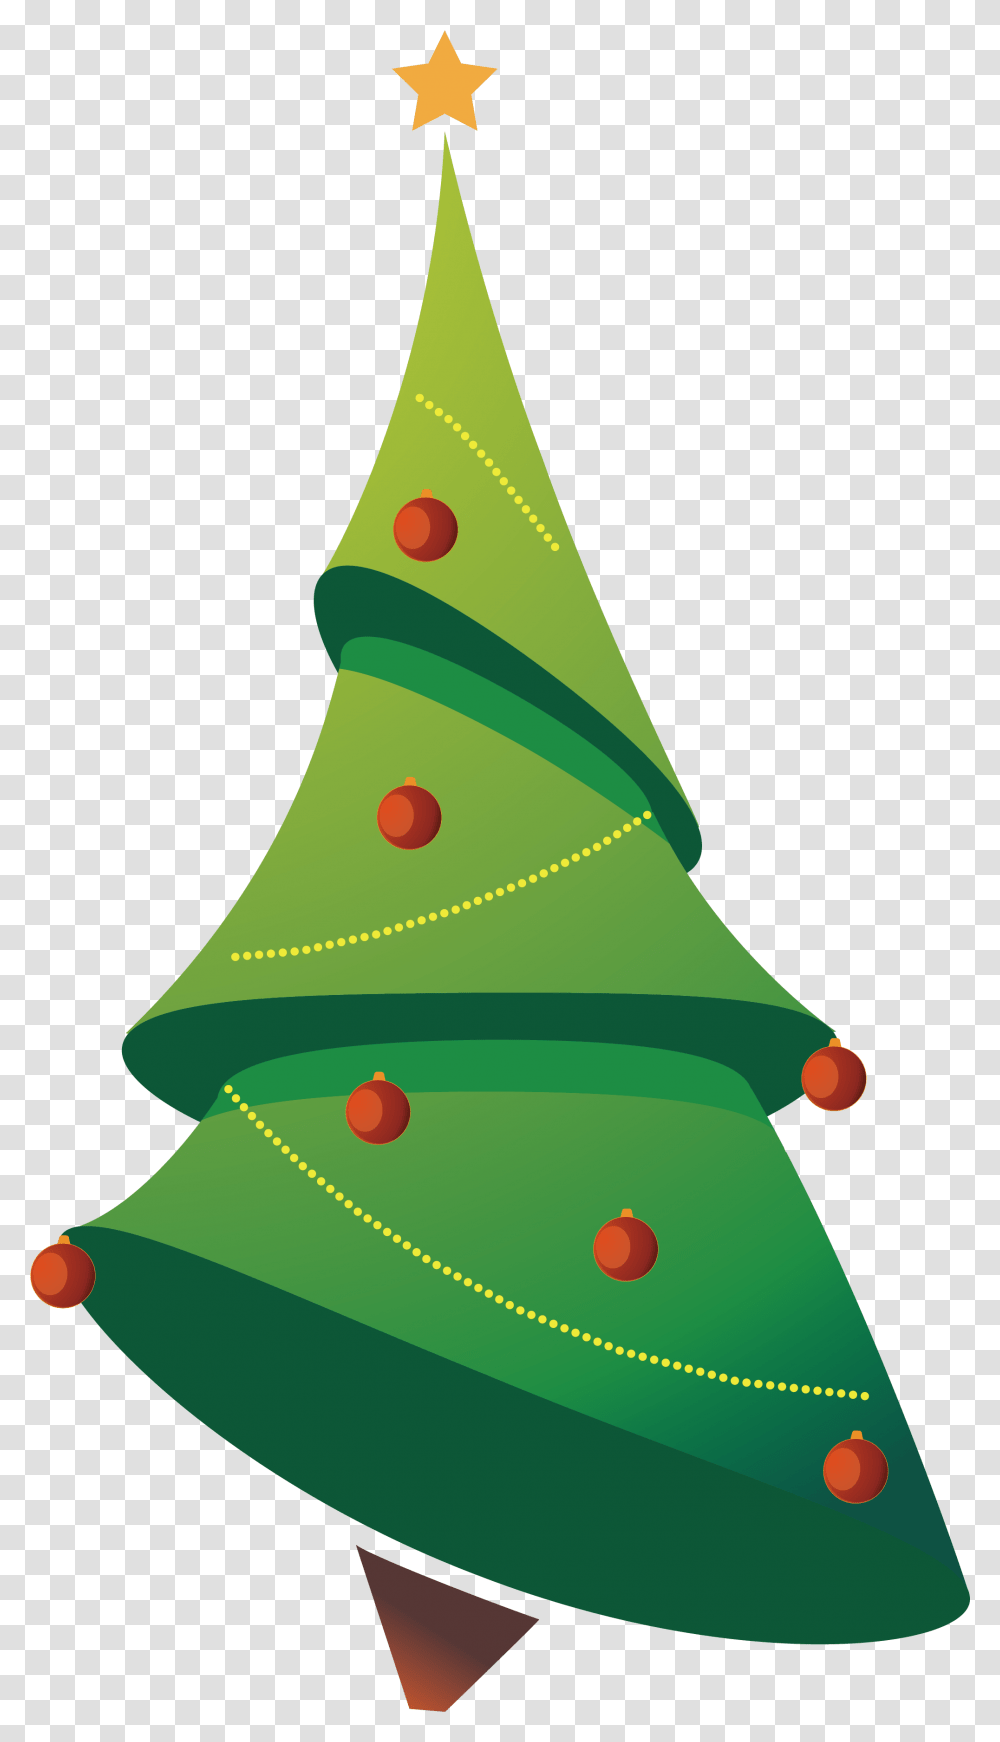 Christmas Tree Vector Image Ideas Vector Christmas Tree, Plant, Ornament, Star Symbol, Triangle Transparent Png